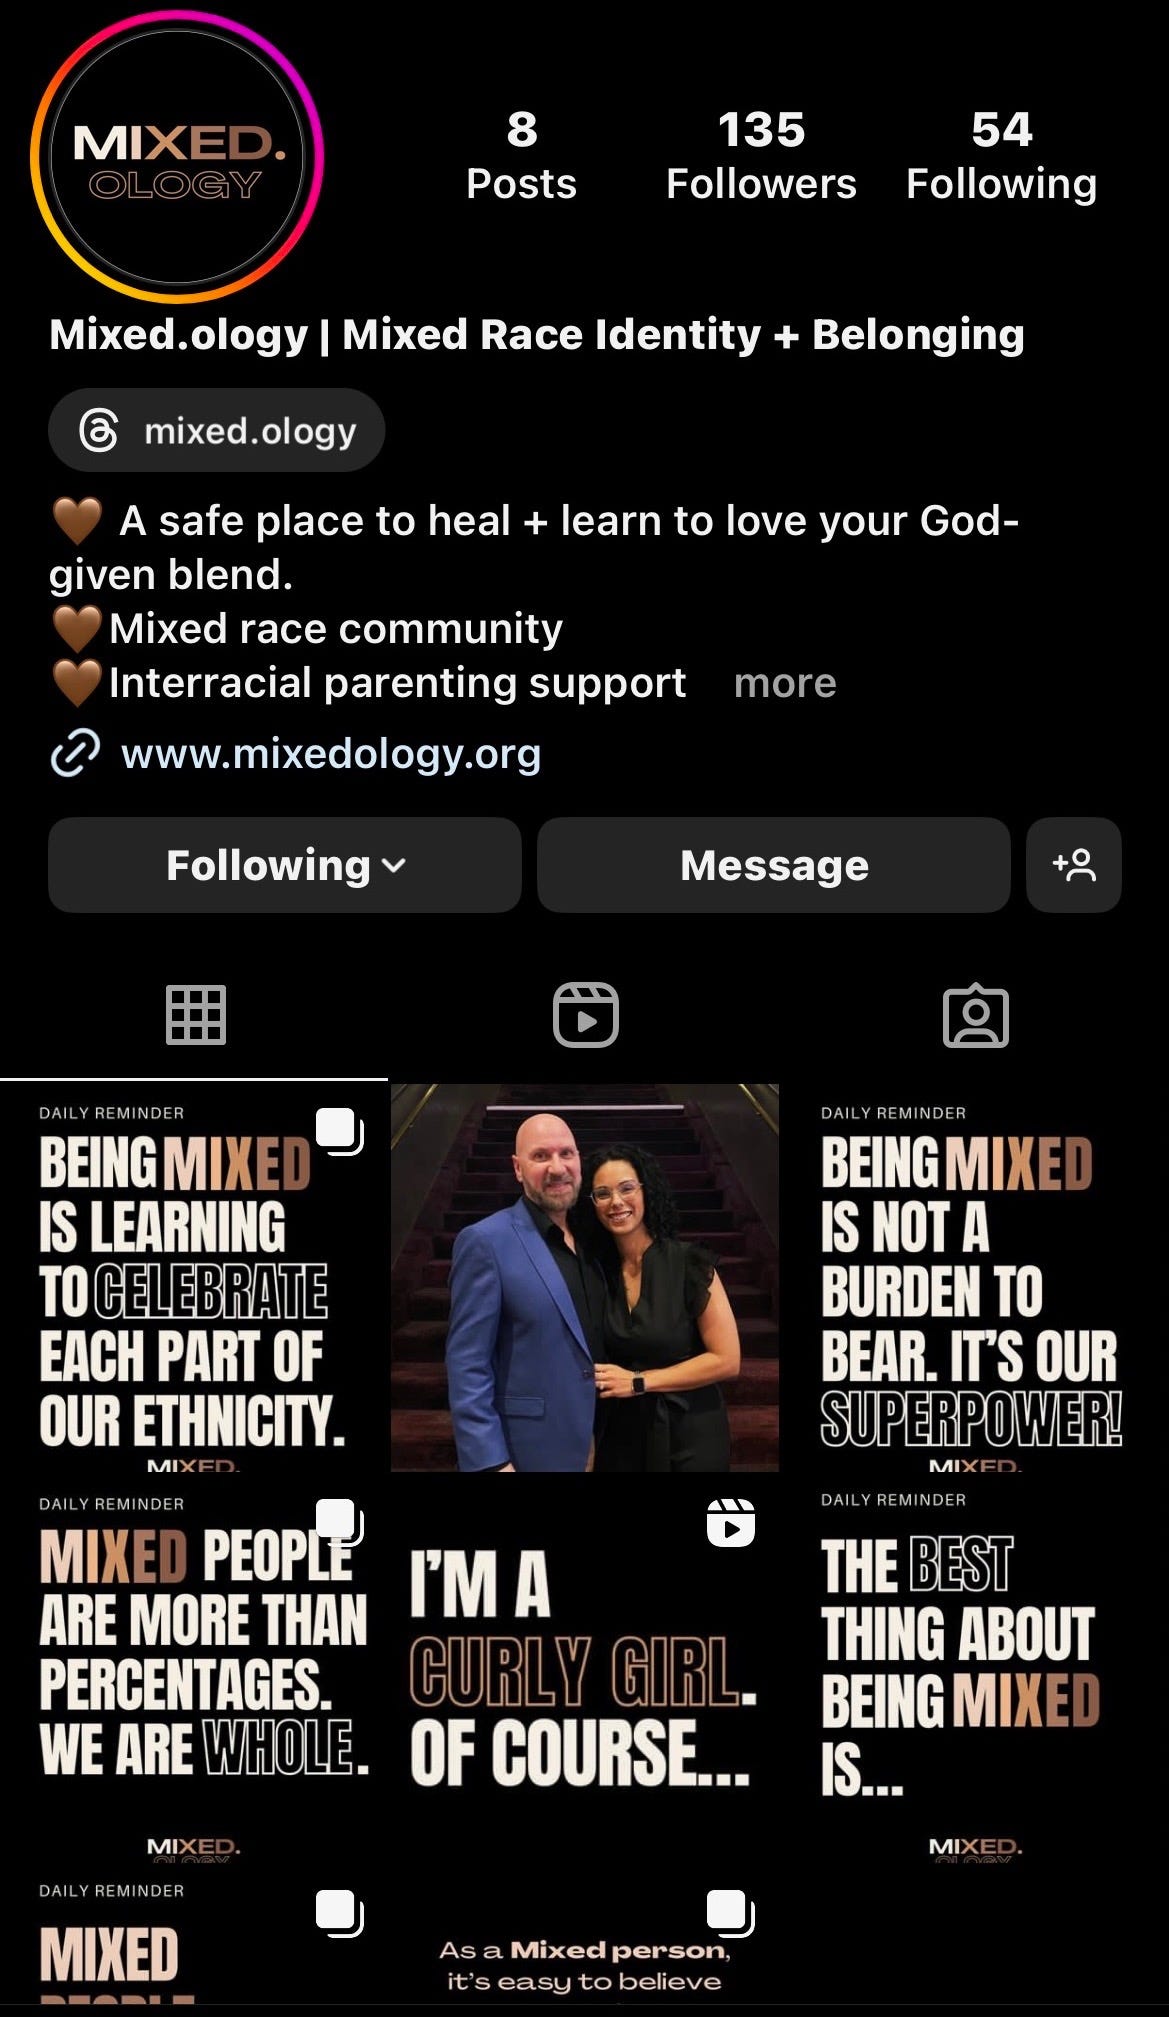 Mixed.ology Instagram page. Follow Mixed.ology. Mixed Race community